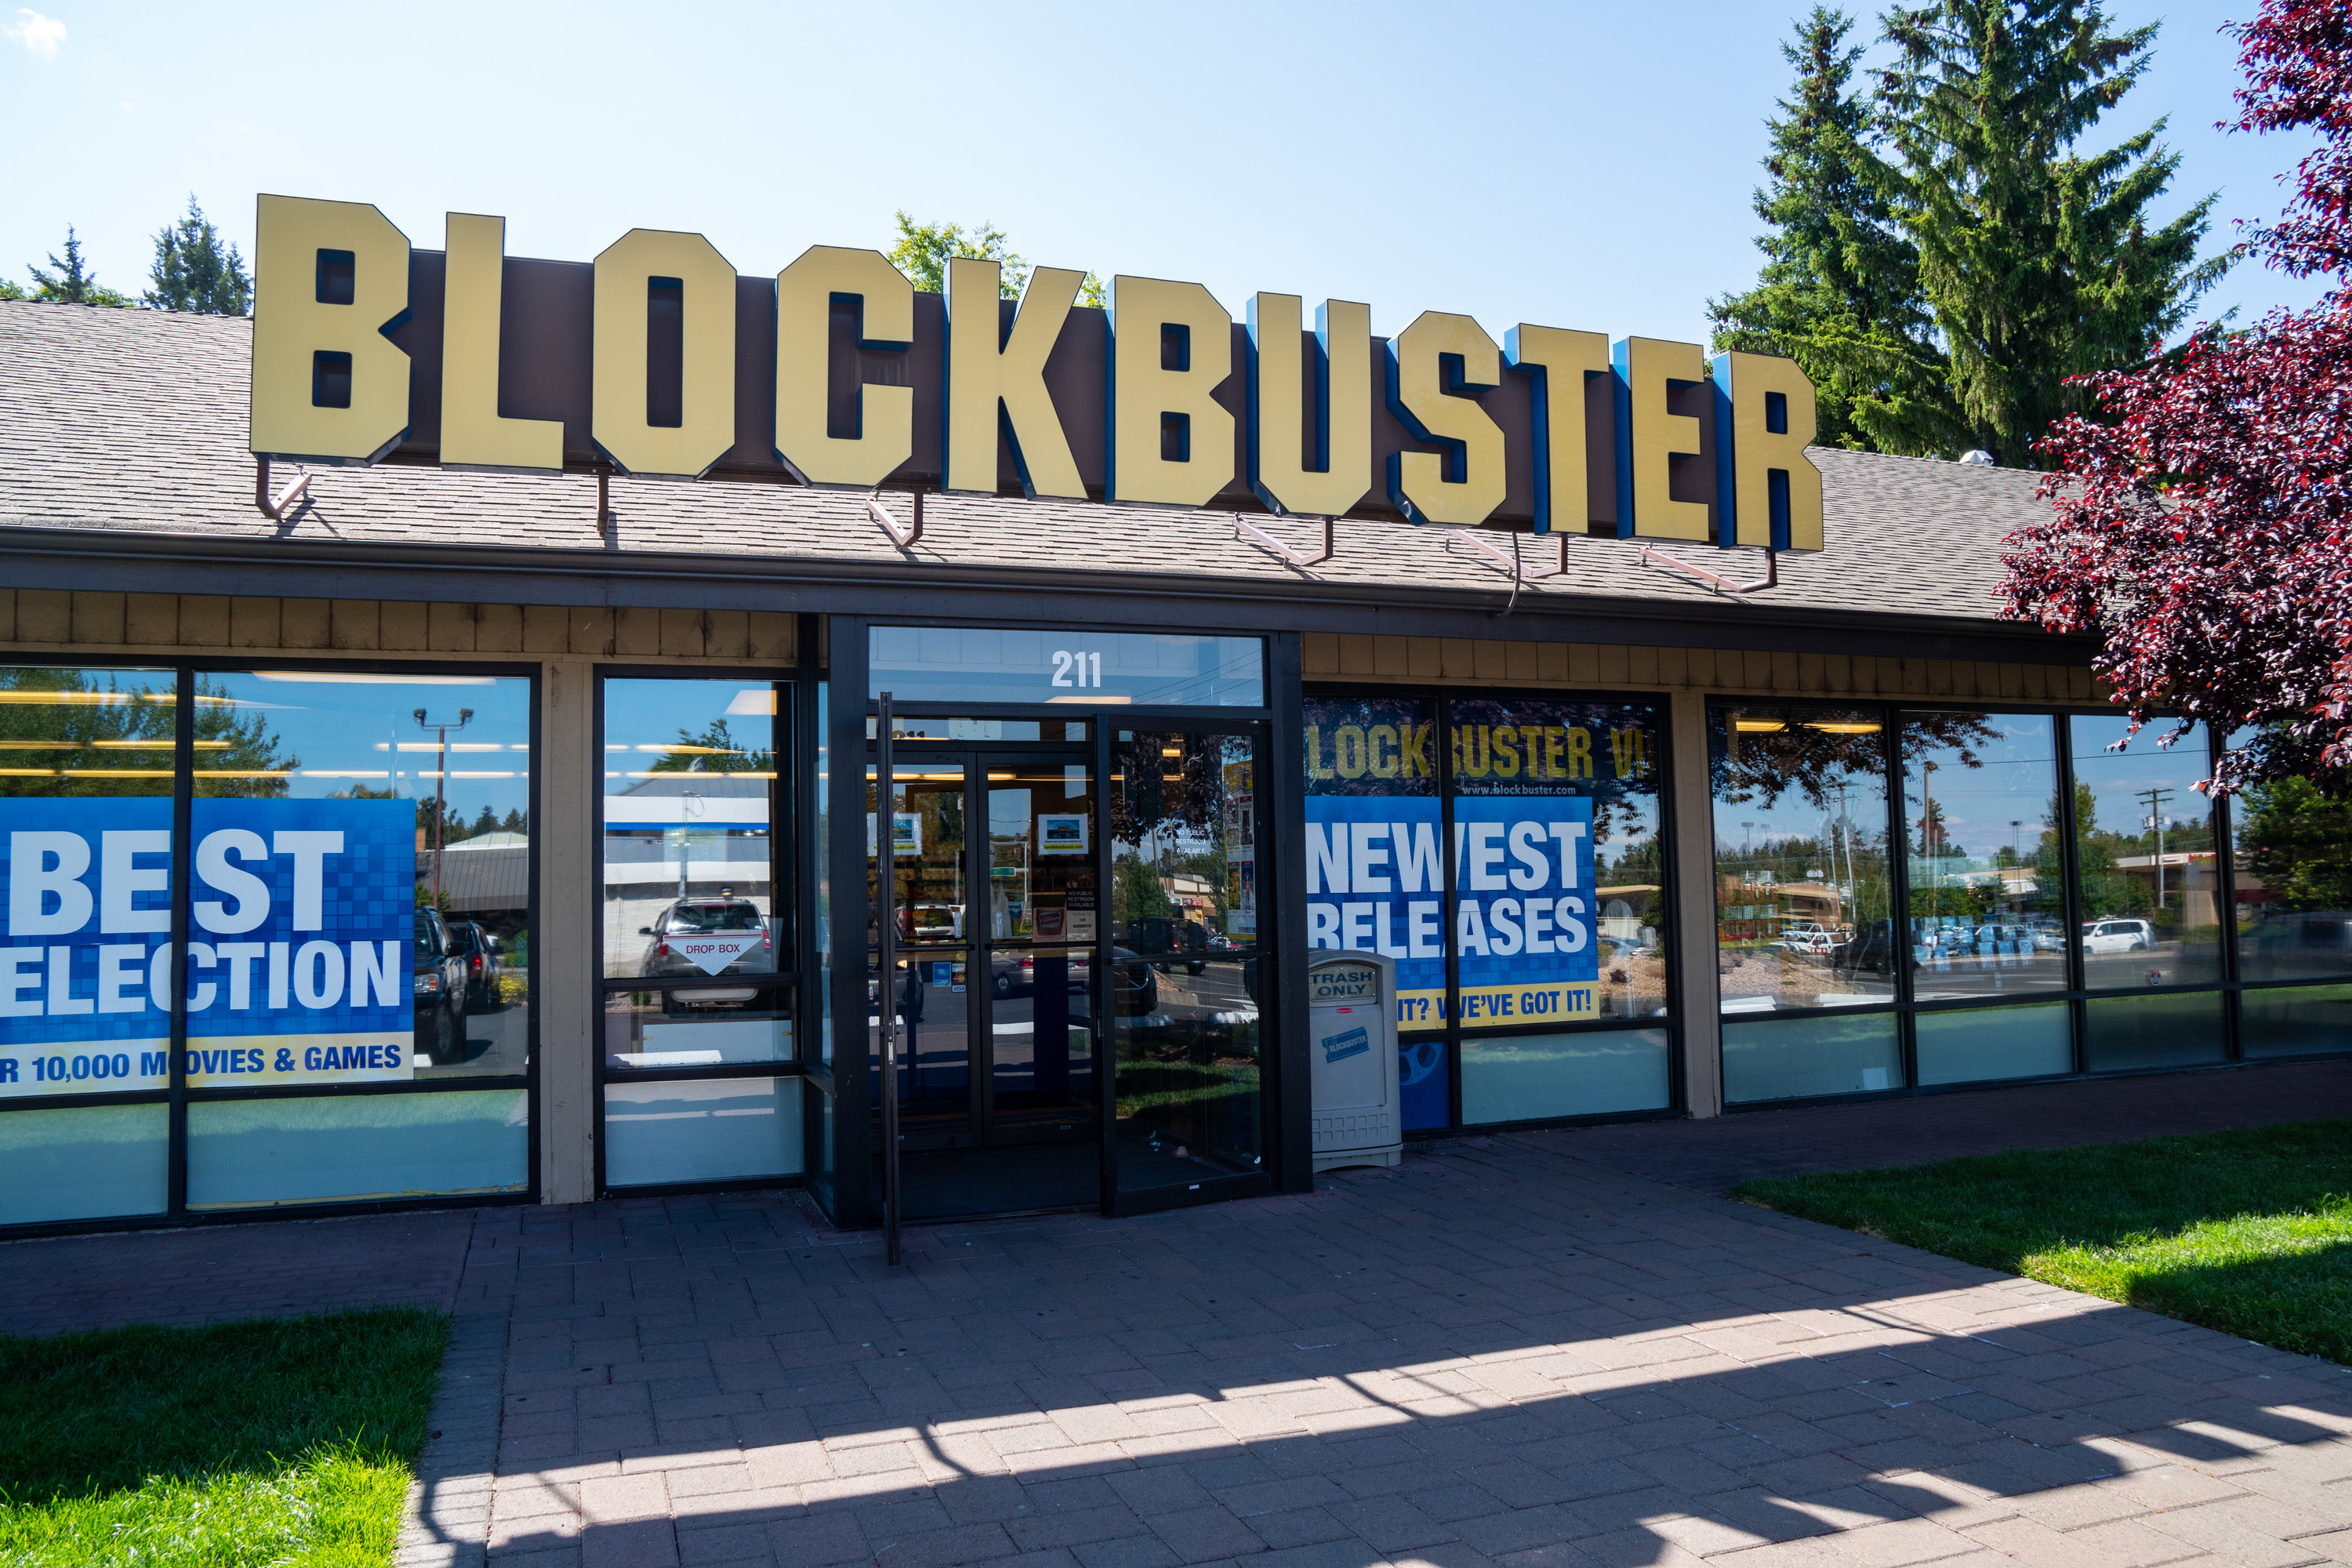 The exterior of a Blockbuster store